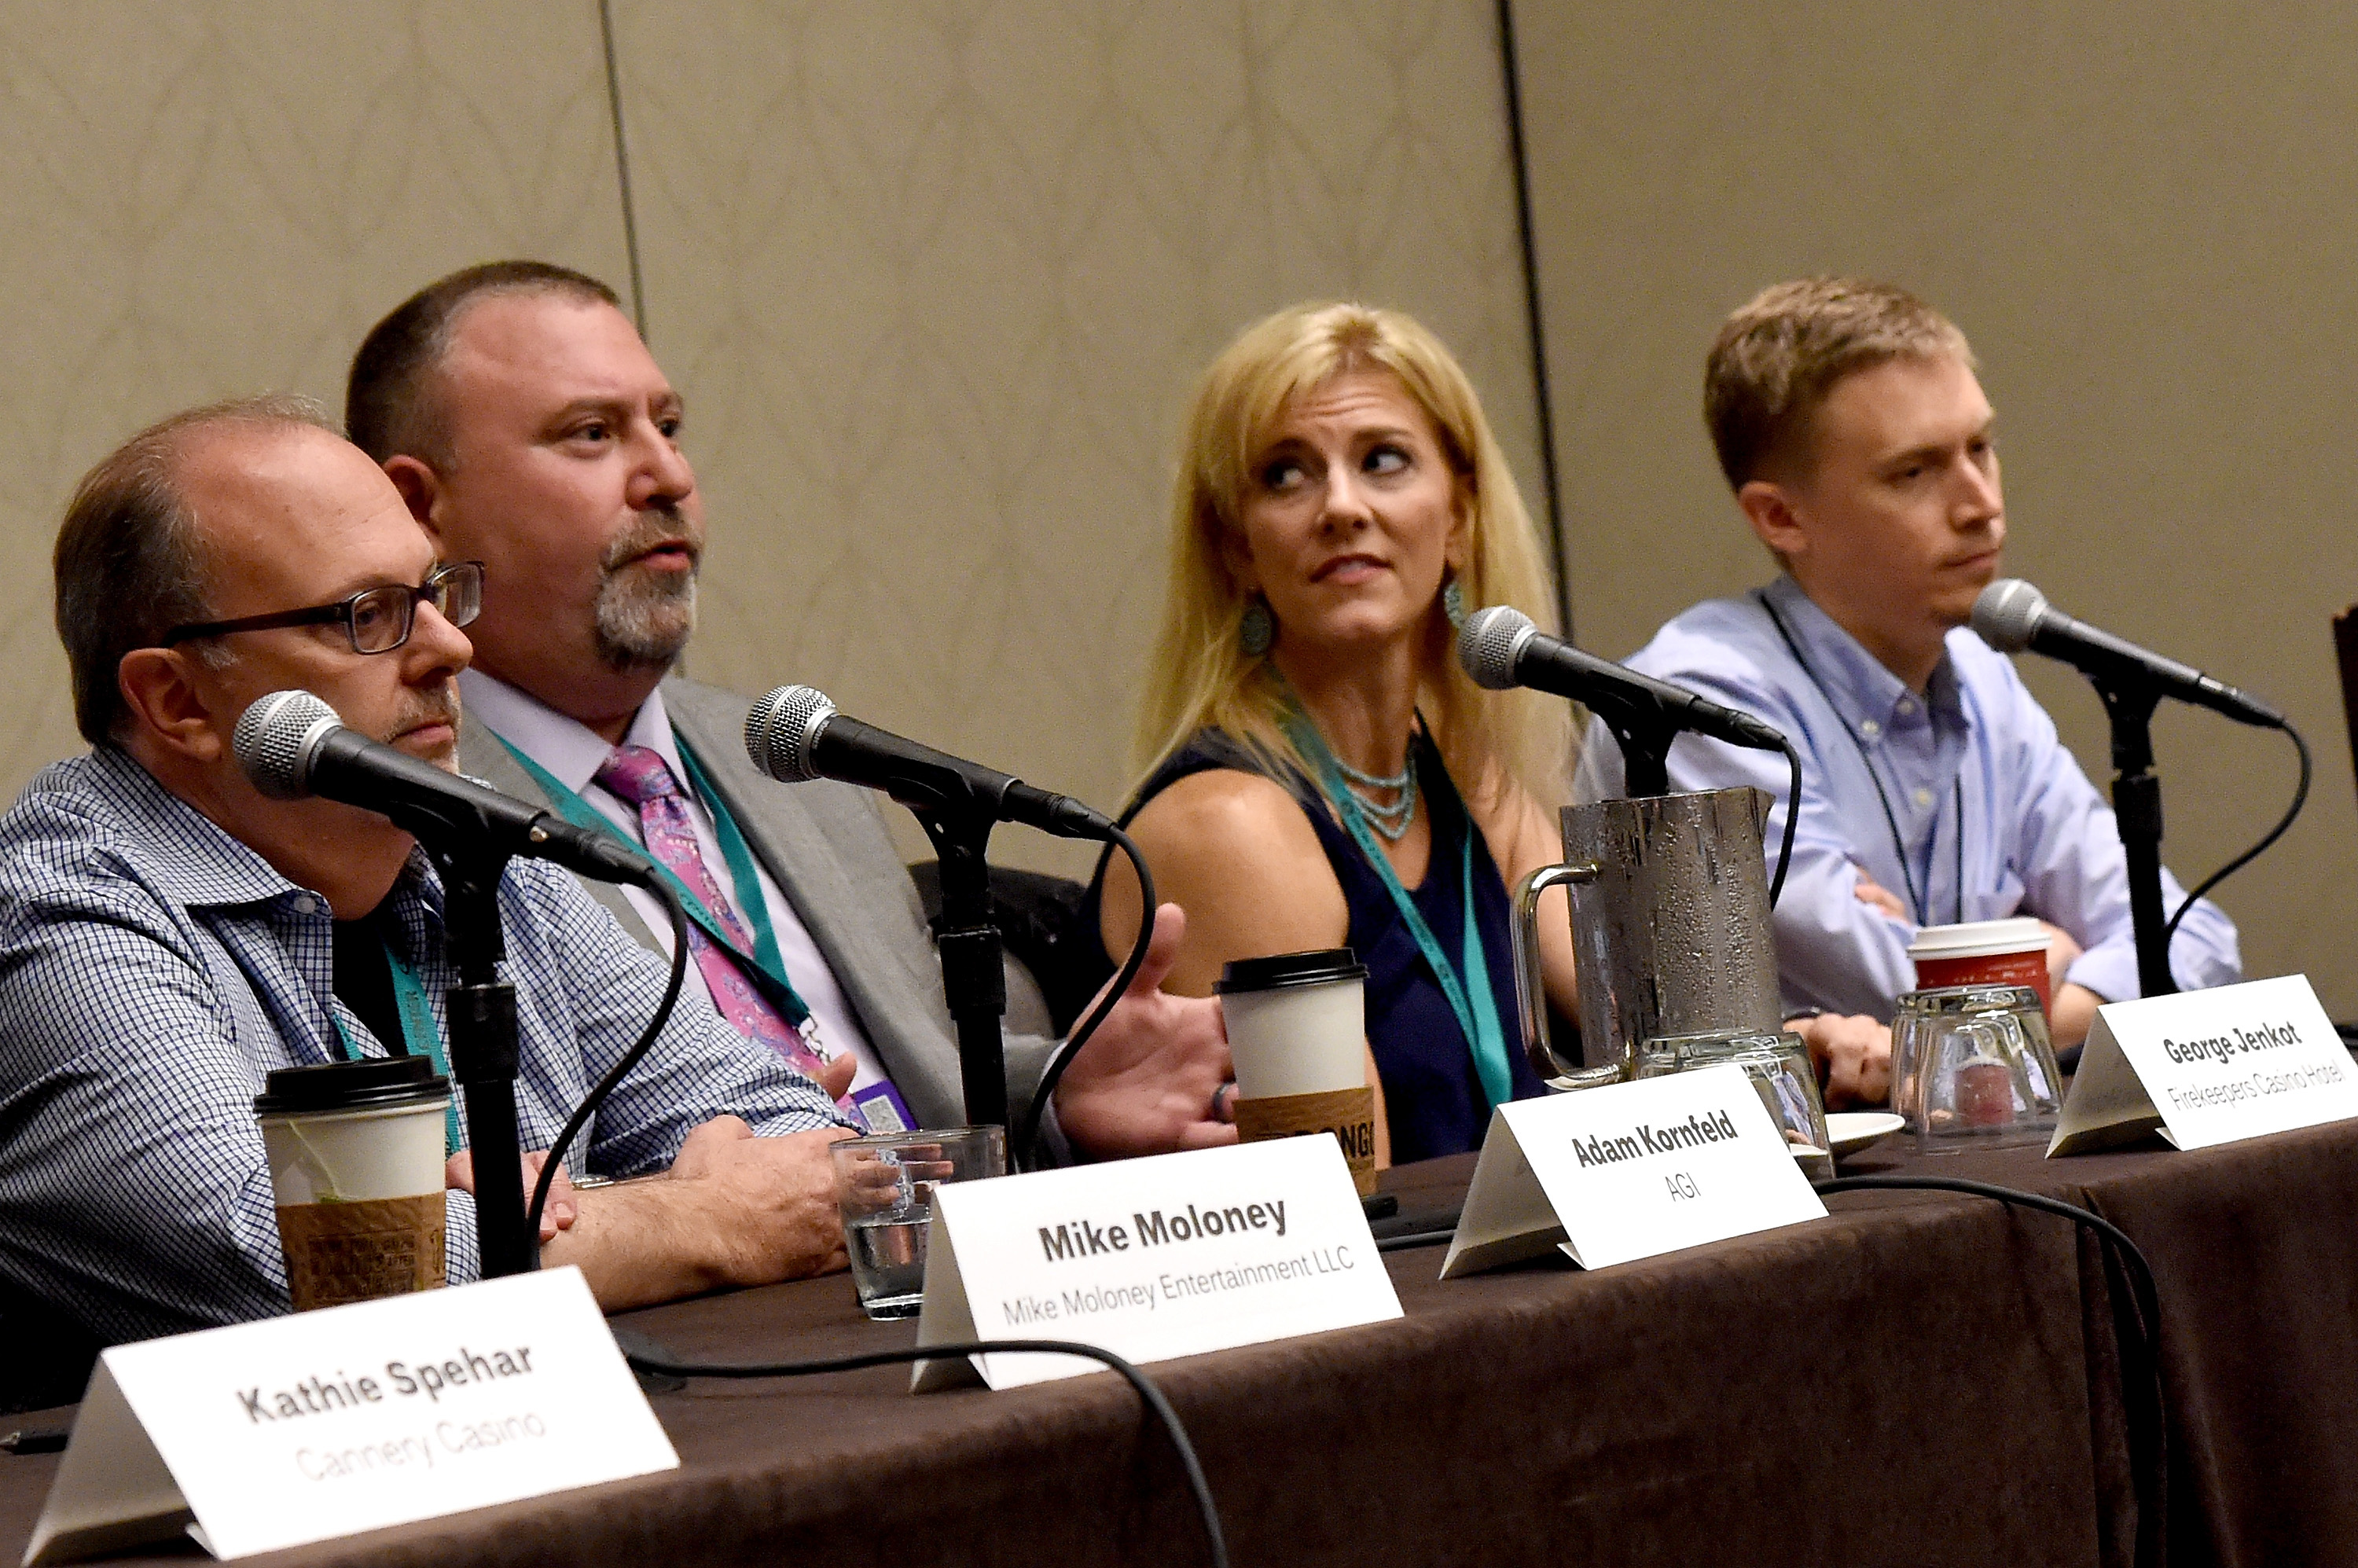 NASHVILLE, TN - OCTOBER 13:  Adam Kornfeld of AGI, George Jenkot of FireKeepers Casino Hotel, Laura Ishum of Pinnacle Entertainment, and Nate Herweyer of Paradigm Talent Agency speak on the Casino Entertainment: Trends & Solutions panel during the IEBA 2015 Conference - Day 3 on October 13, 2015 in Nashville, Tennessee.  (Photo by Rick Diamond/Getty Images for IEBA)